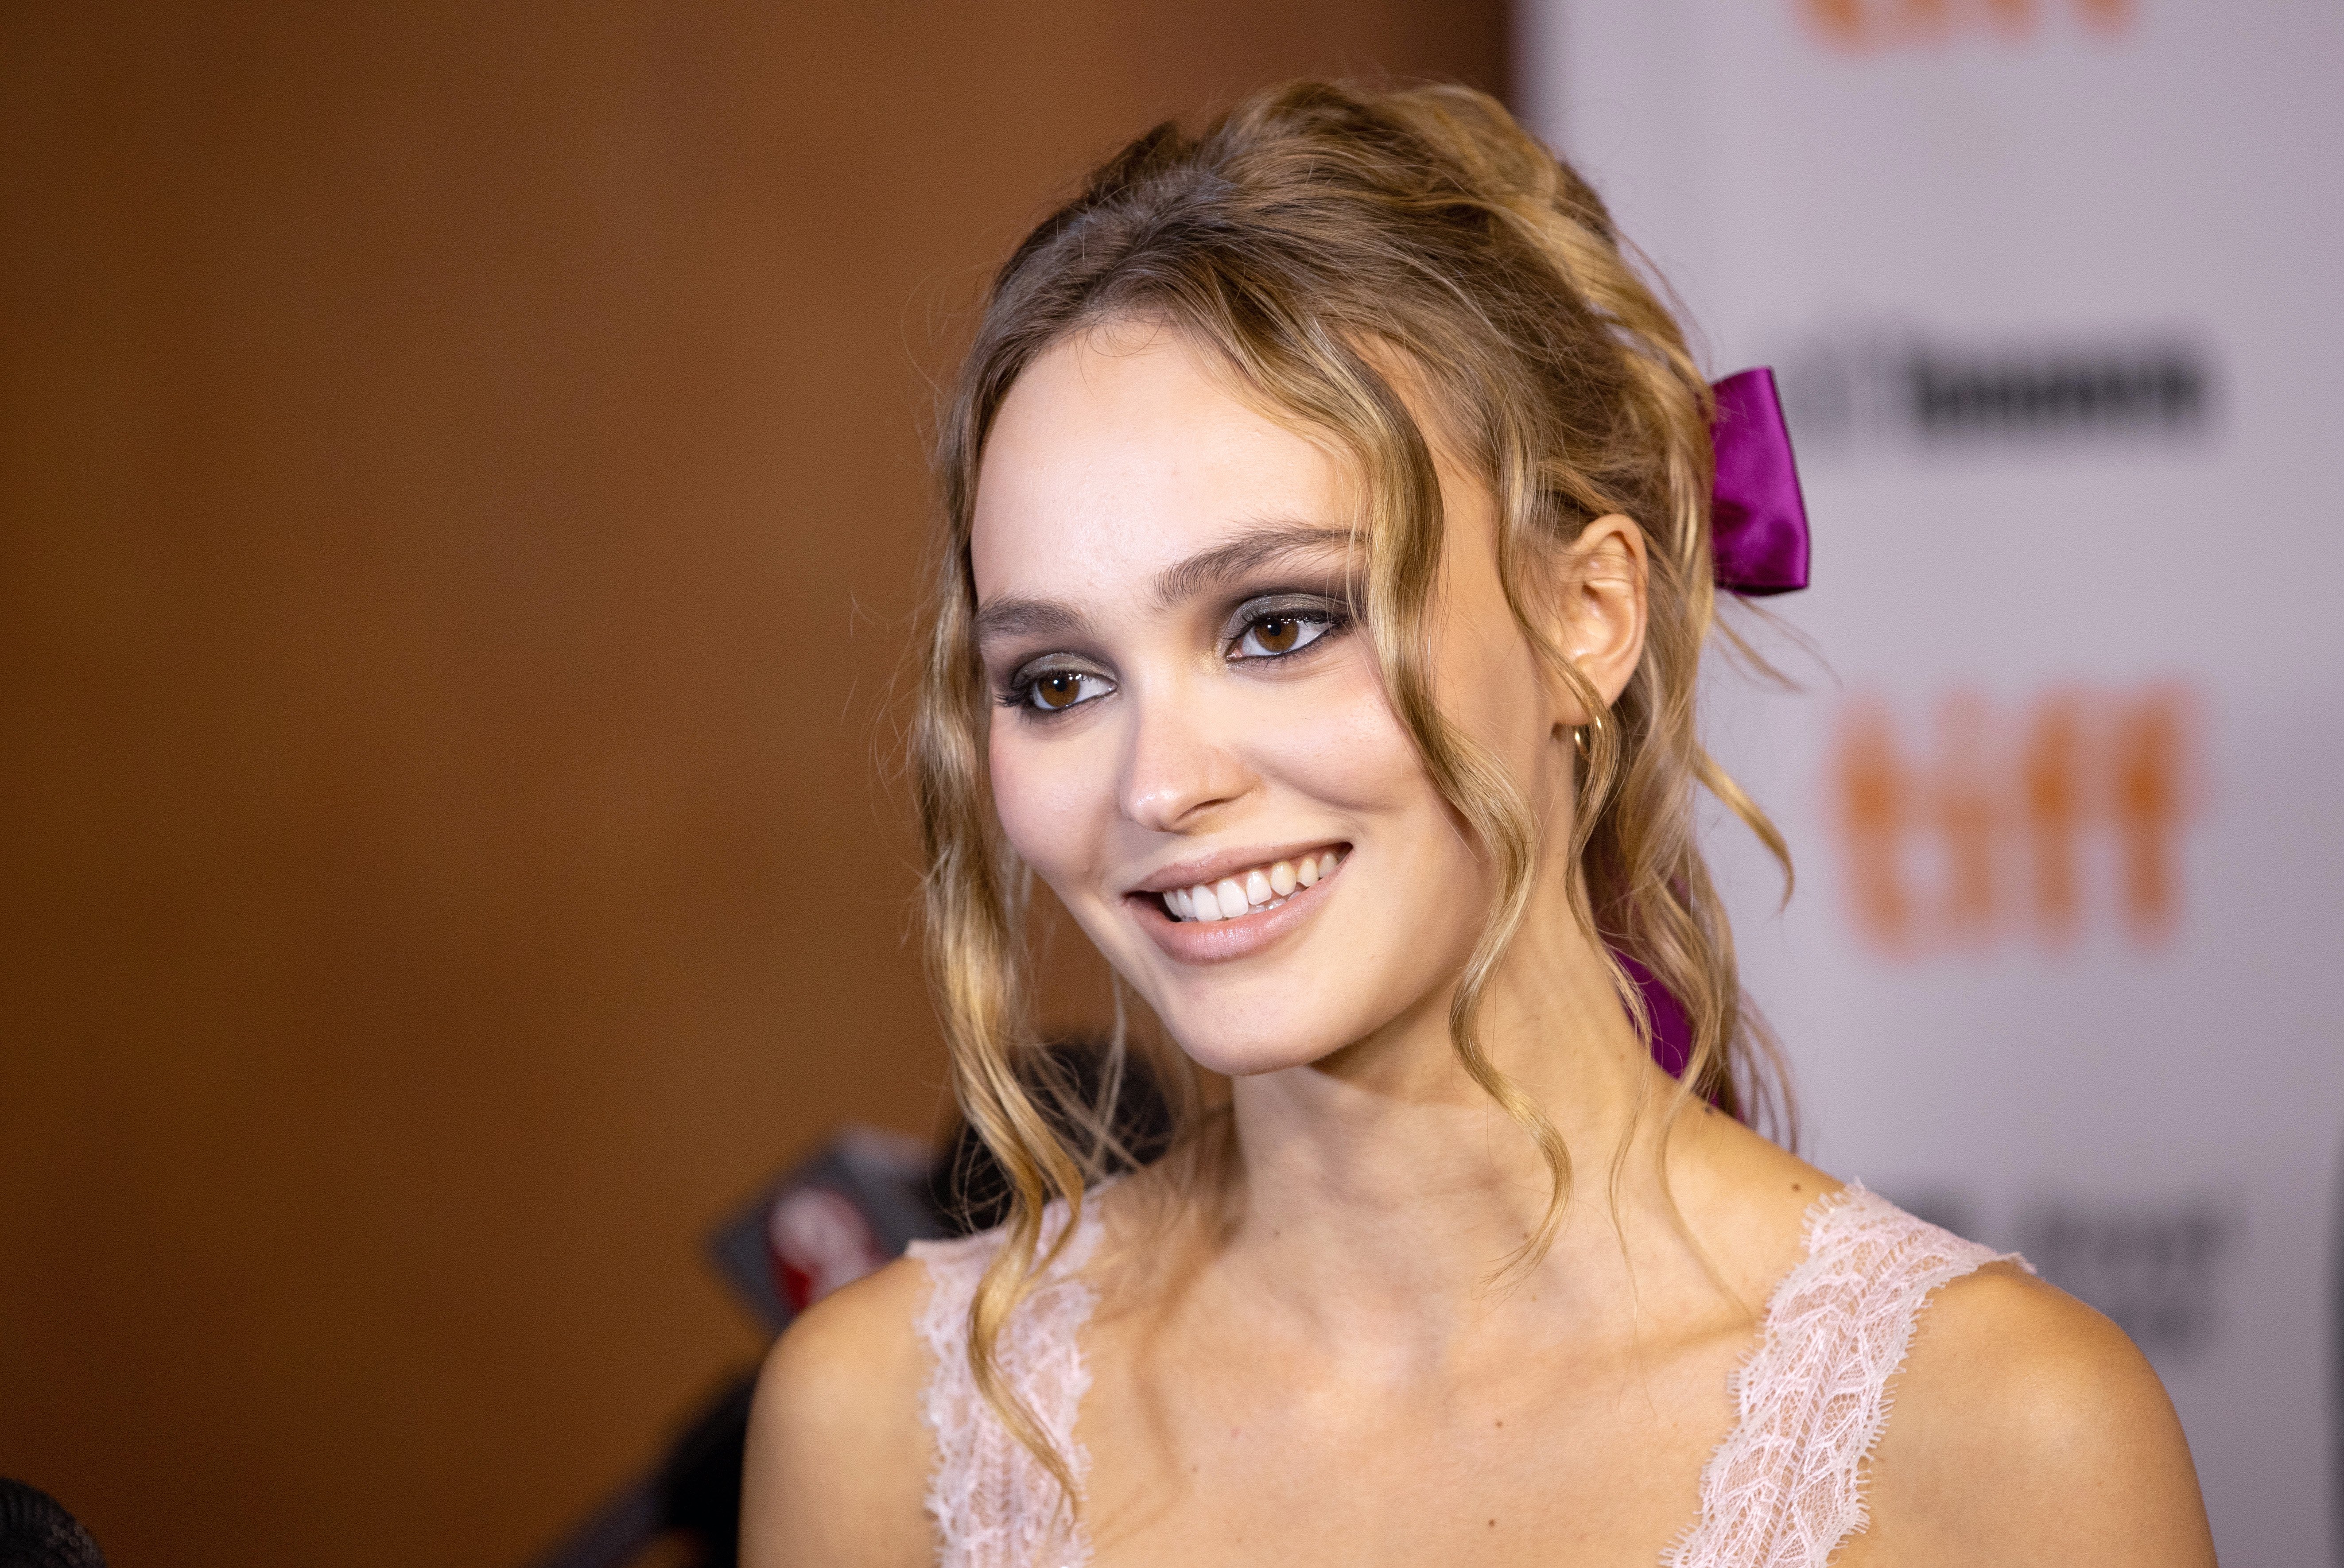 Lily-Rose Depp photographed at the "Wolf" premiere during the 2021 Toronto International Film Festival at Princess of Wales Theatre on September 17, 2021 in Toronto, Ontario. | Source: Getty Images